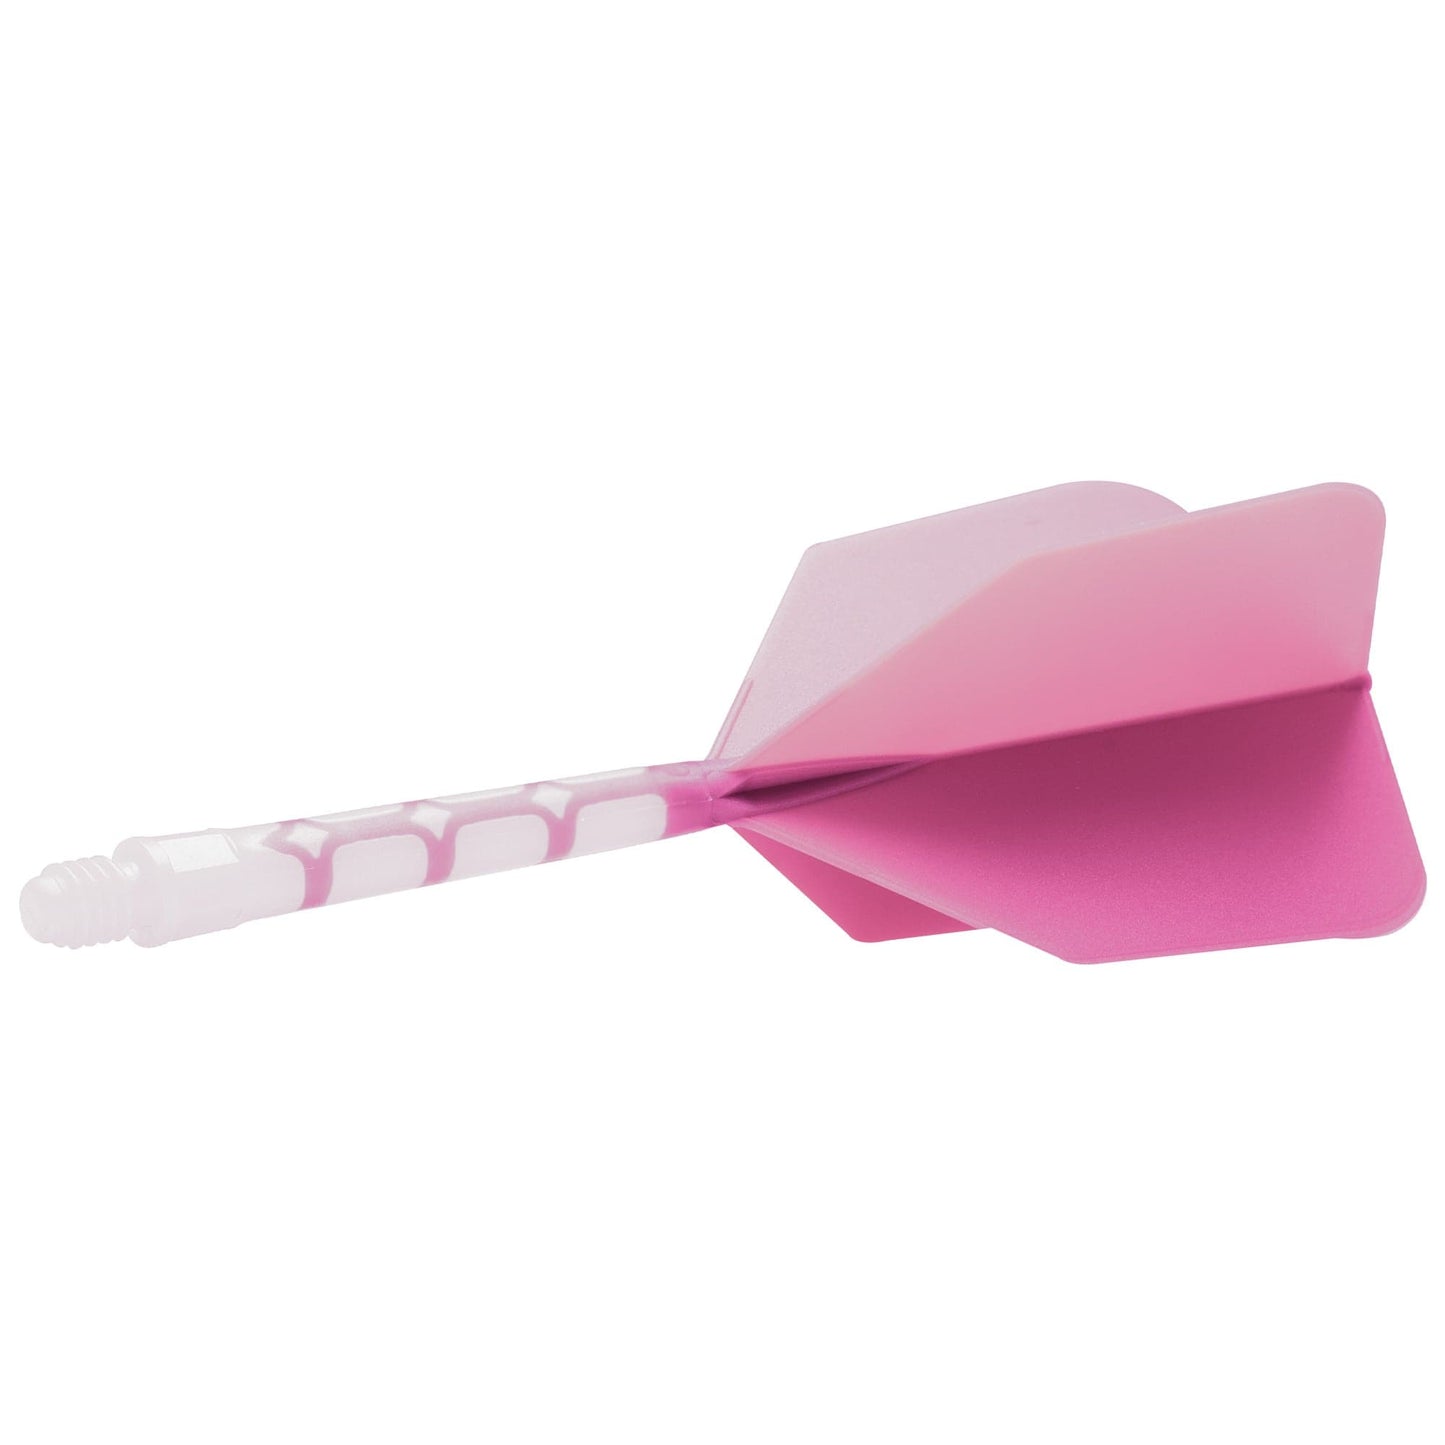 Cuesoul Rost T19 Integrated Dart Shaft and Flights - Big Wing - White with Pink Flight